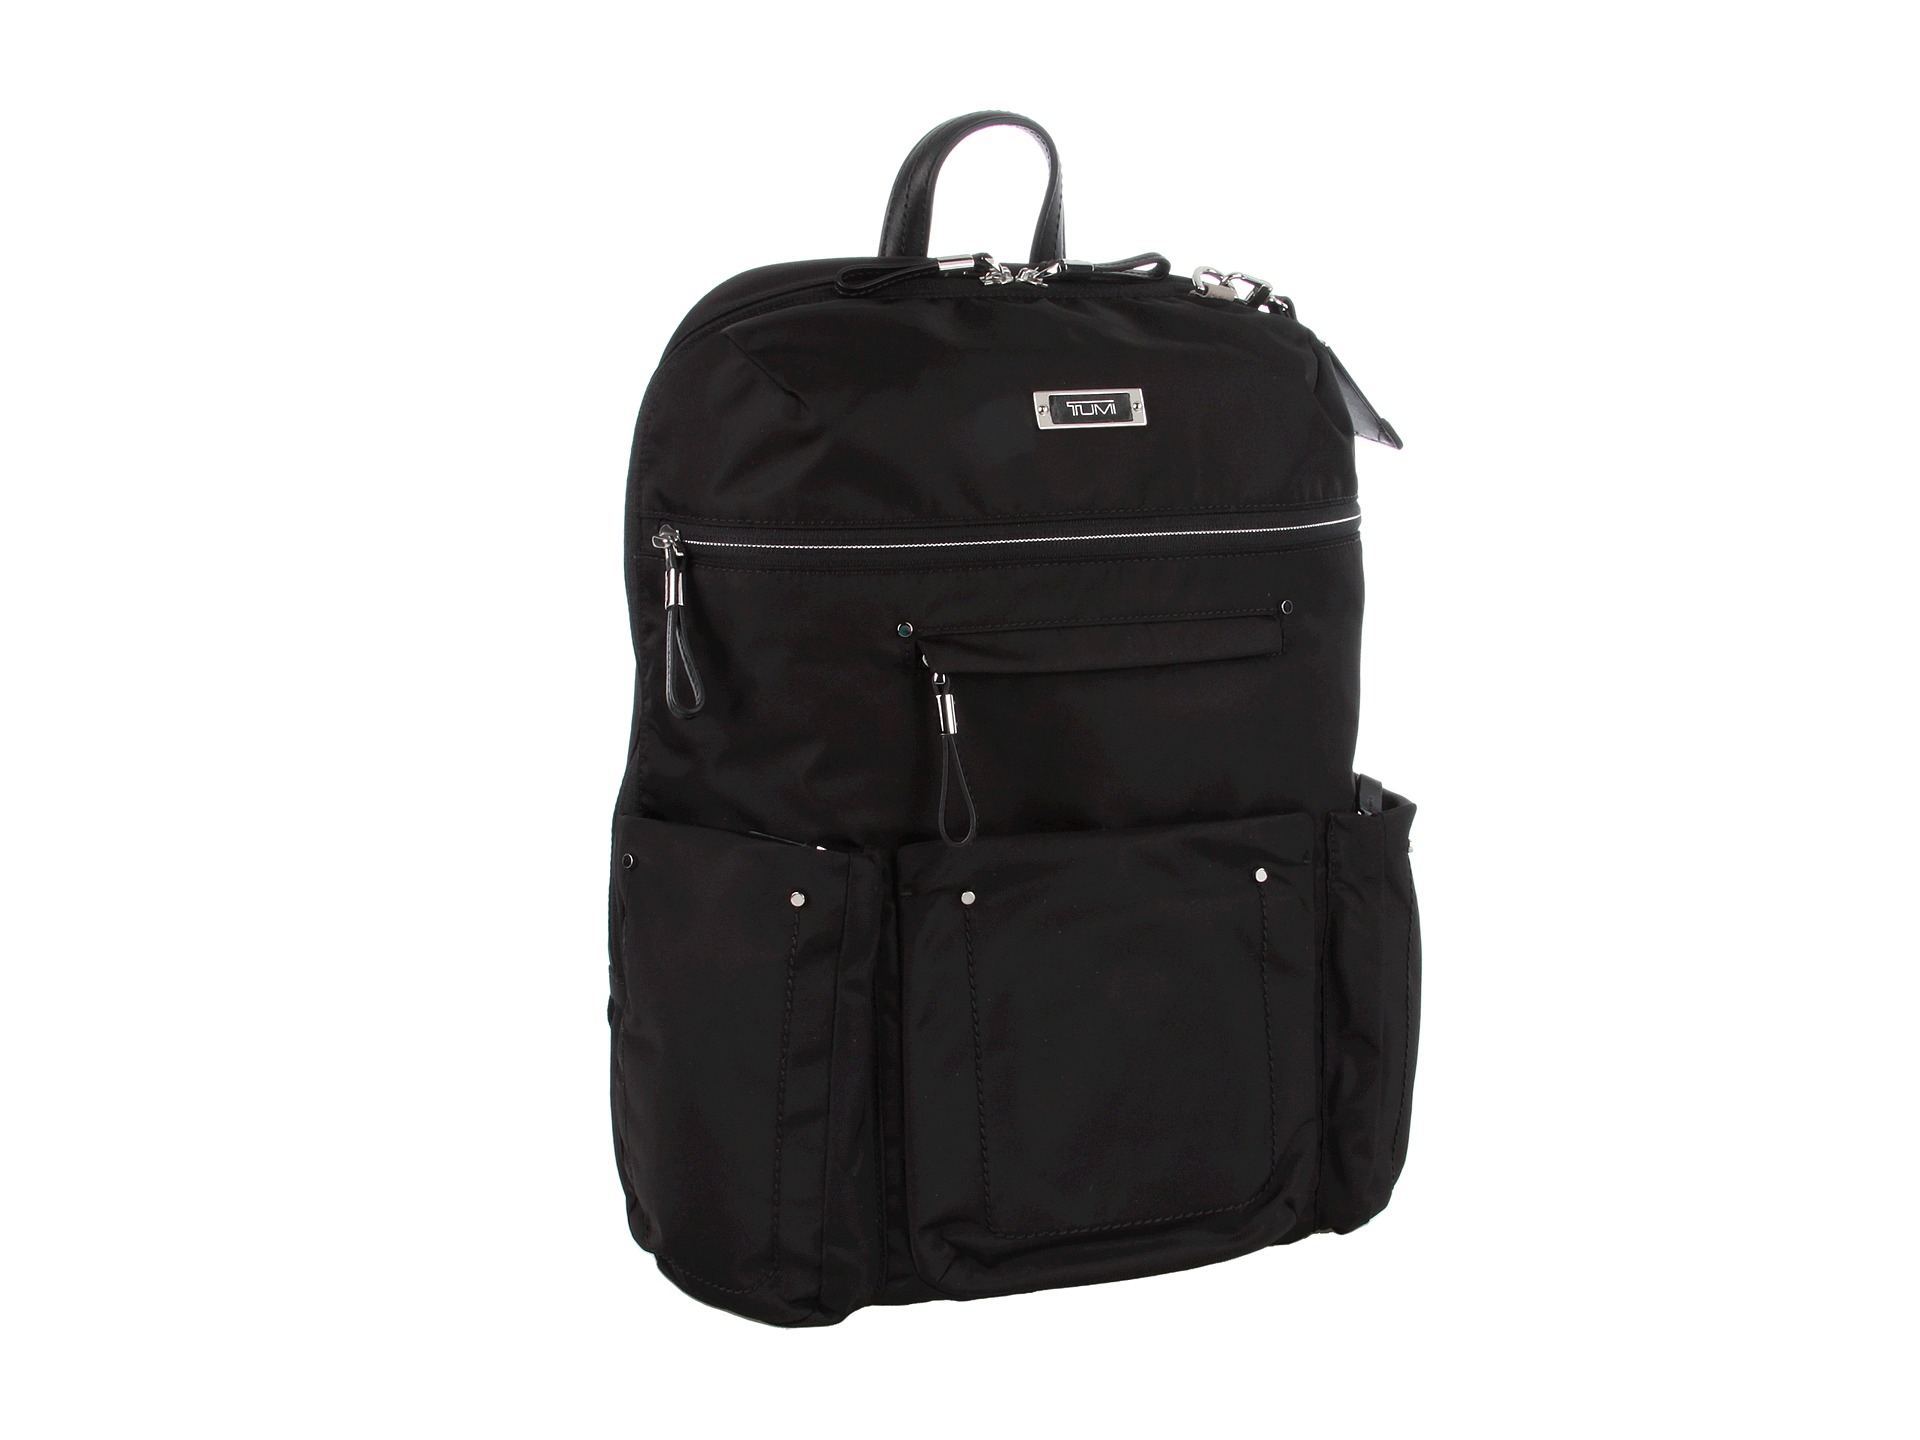 Tumi Voyageur Calais Backpack, Bags, Women | Shipped Free at Zappos